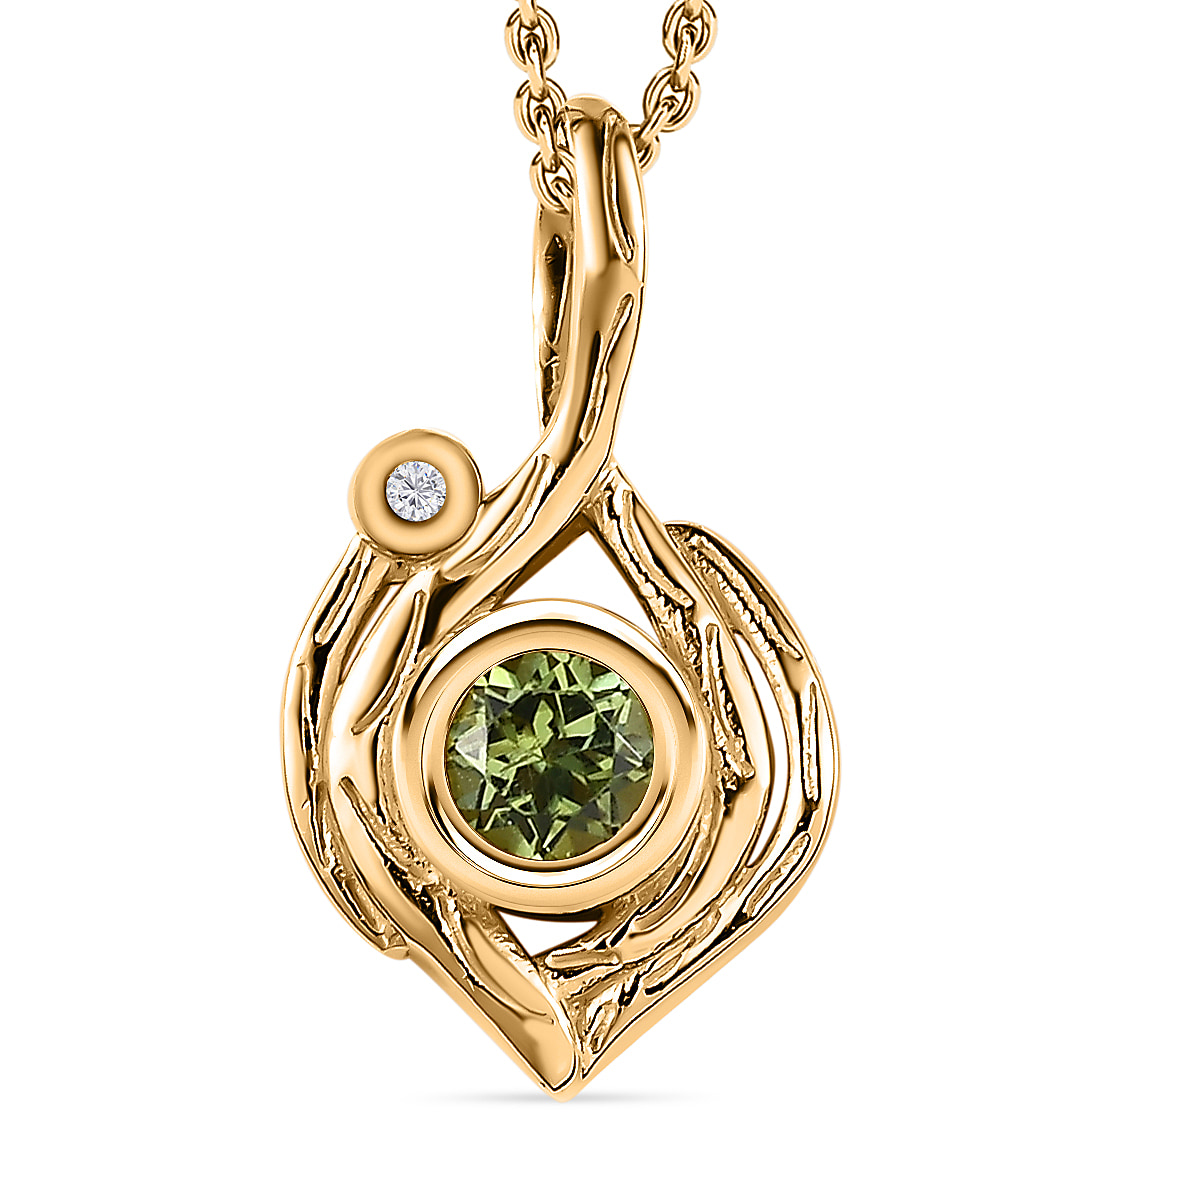 Calabar Tourmaline & Natural Zircon Drop Pendant with Chain (Size 20) in 18K Yellow Gold Vermeil Plated Sterling Silver